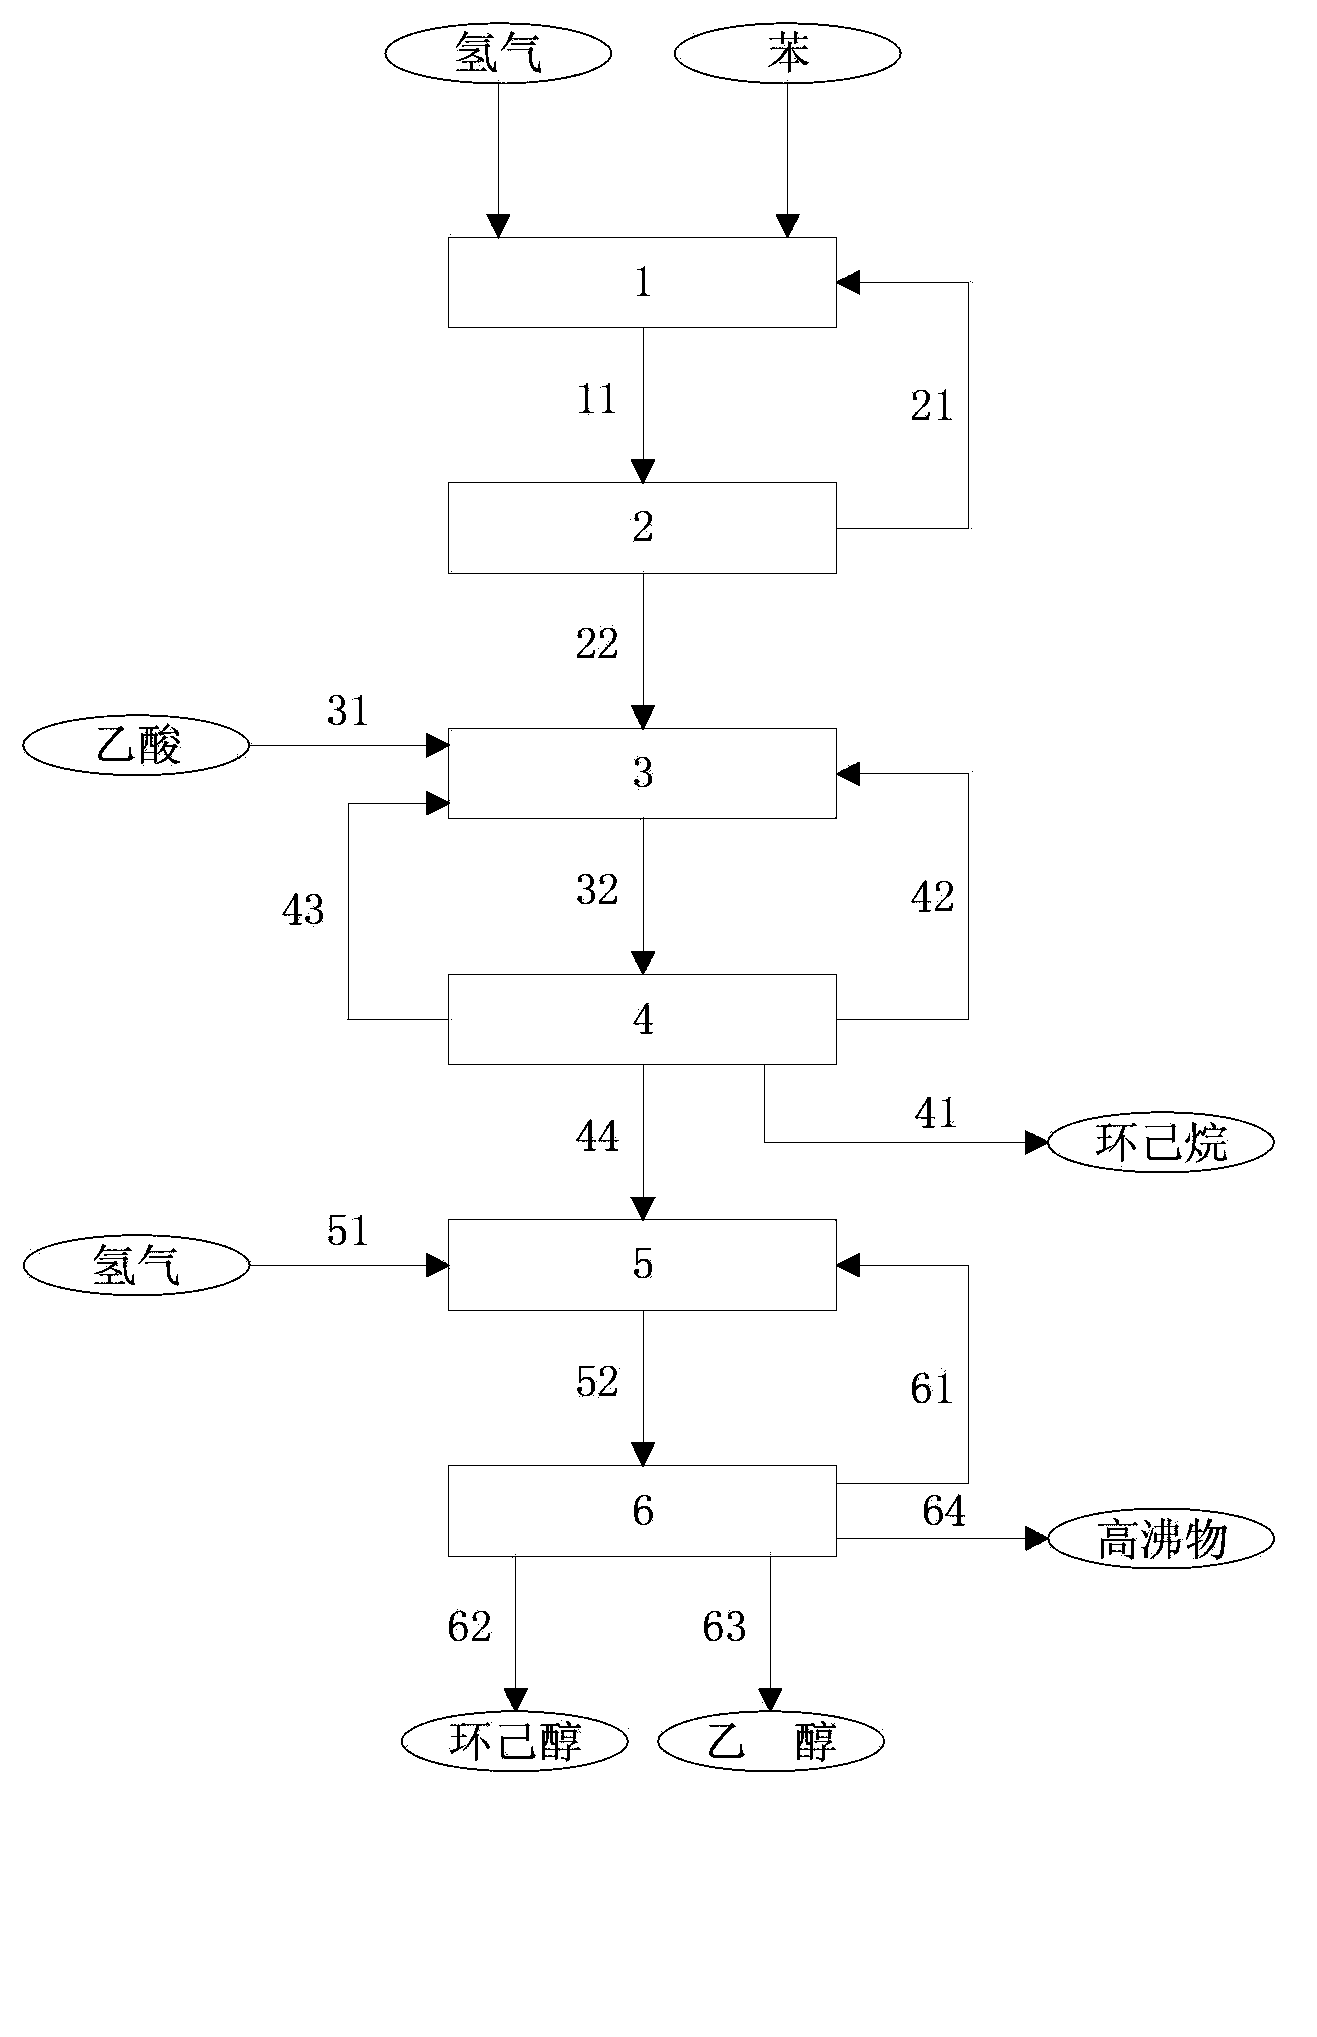 Co-producing method and device for cyclohexanol and ethanol